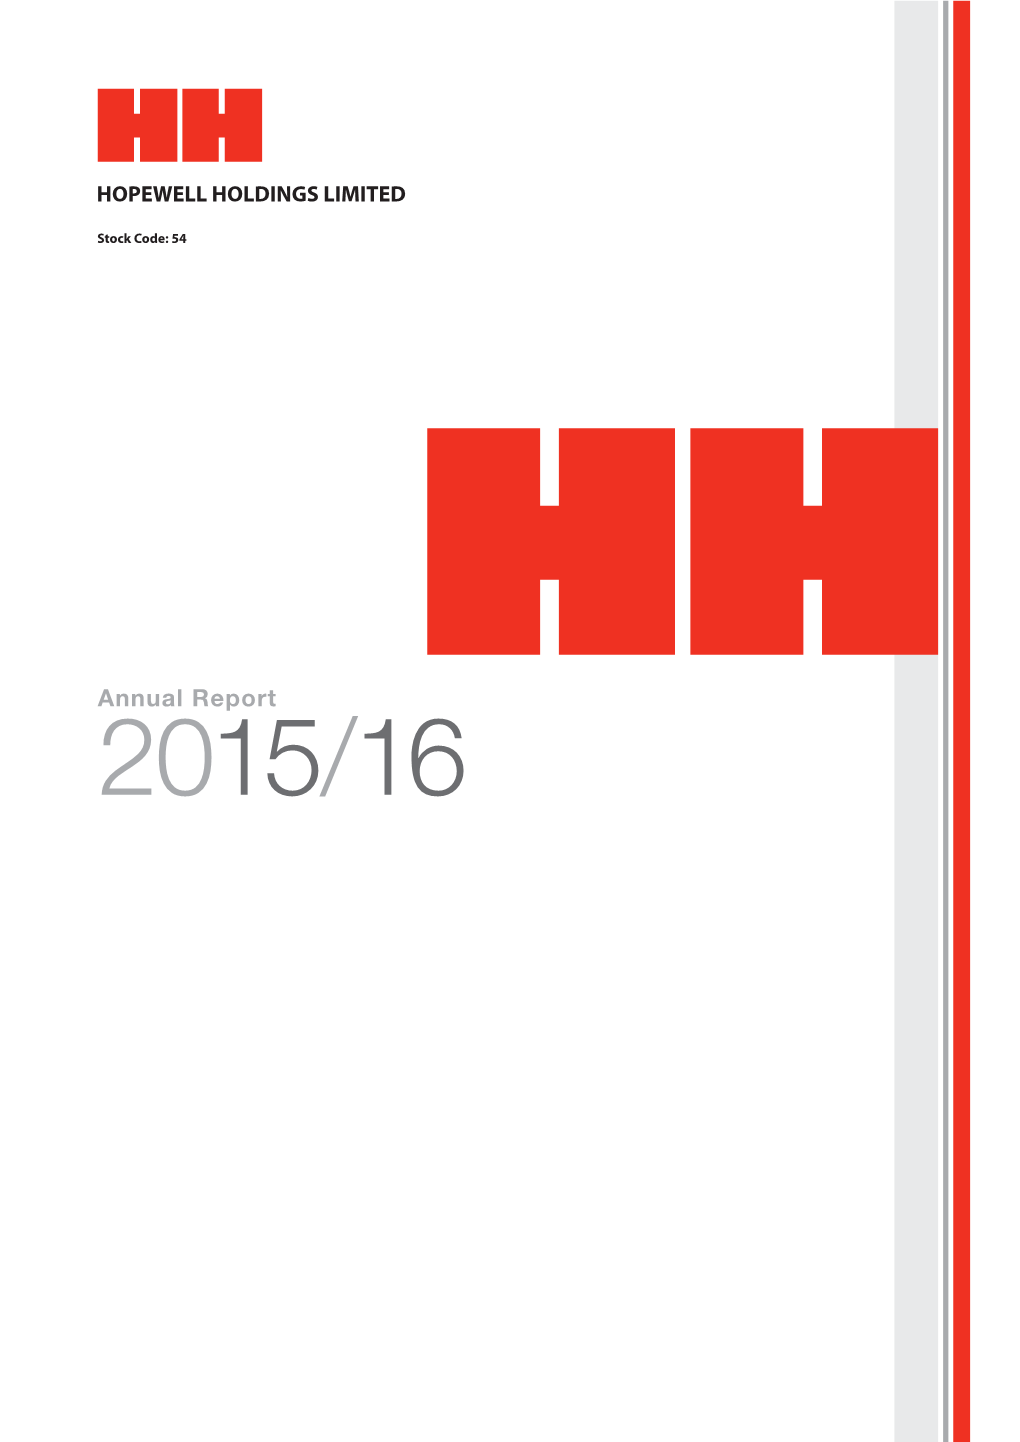 Annual Report 2015/16 Annual Report 2015/16 Hopewell Holdings Limited, a Hong Kong-Based Group Listed on the Stock Exchange Since 1972 (Stock Code: 54)